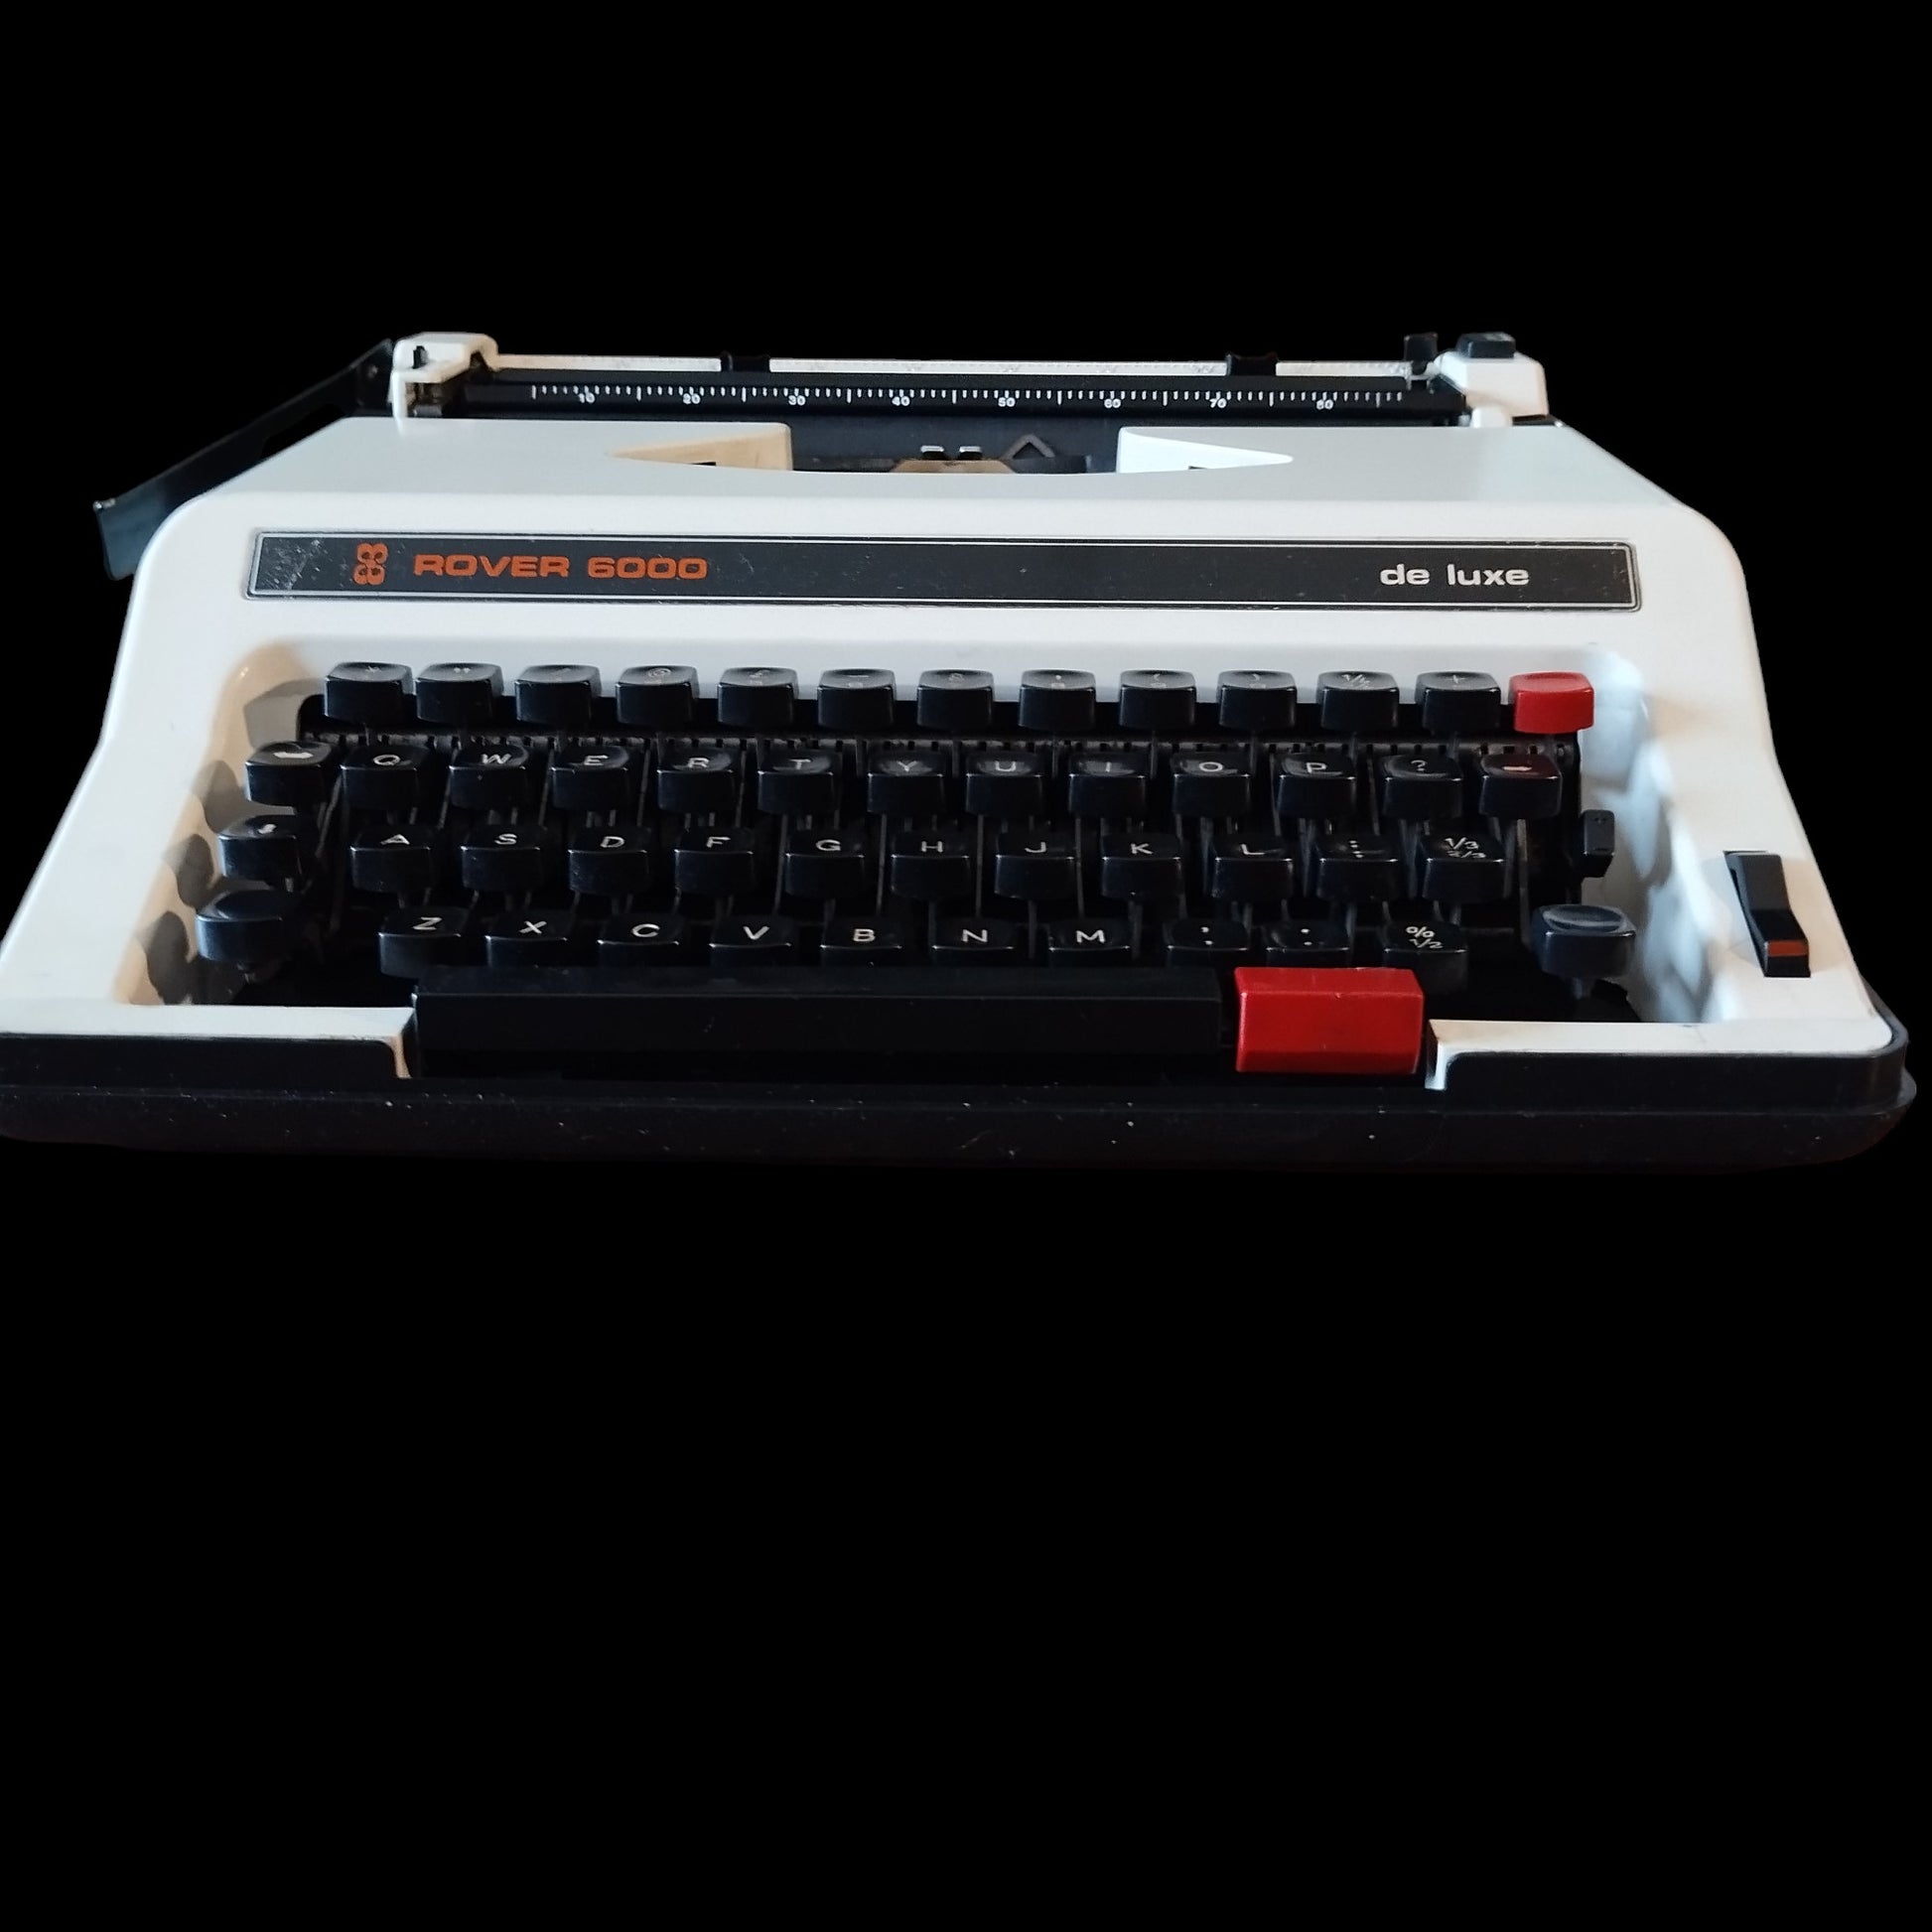 Image of Rover 6000 Typewriter. Available from Universal Typewriter Company.